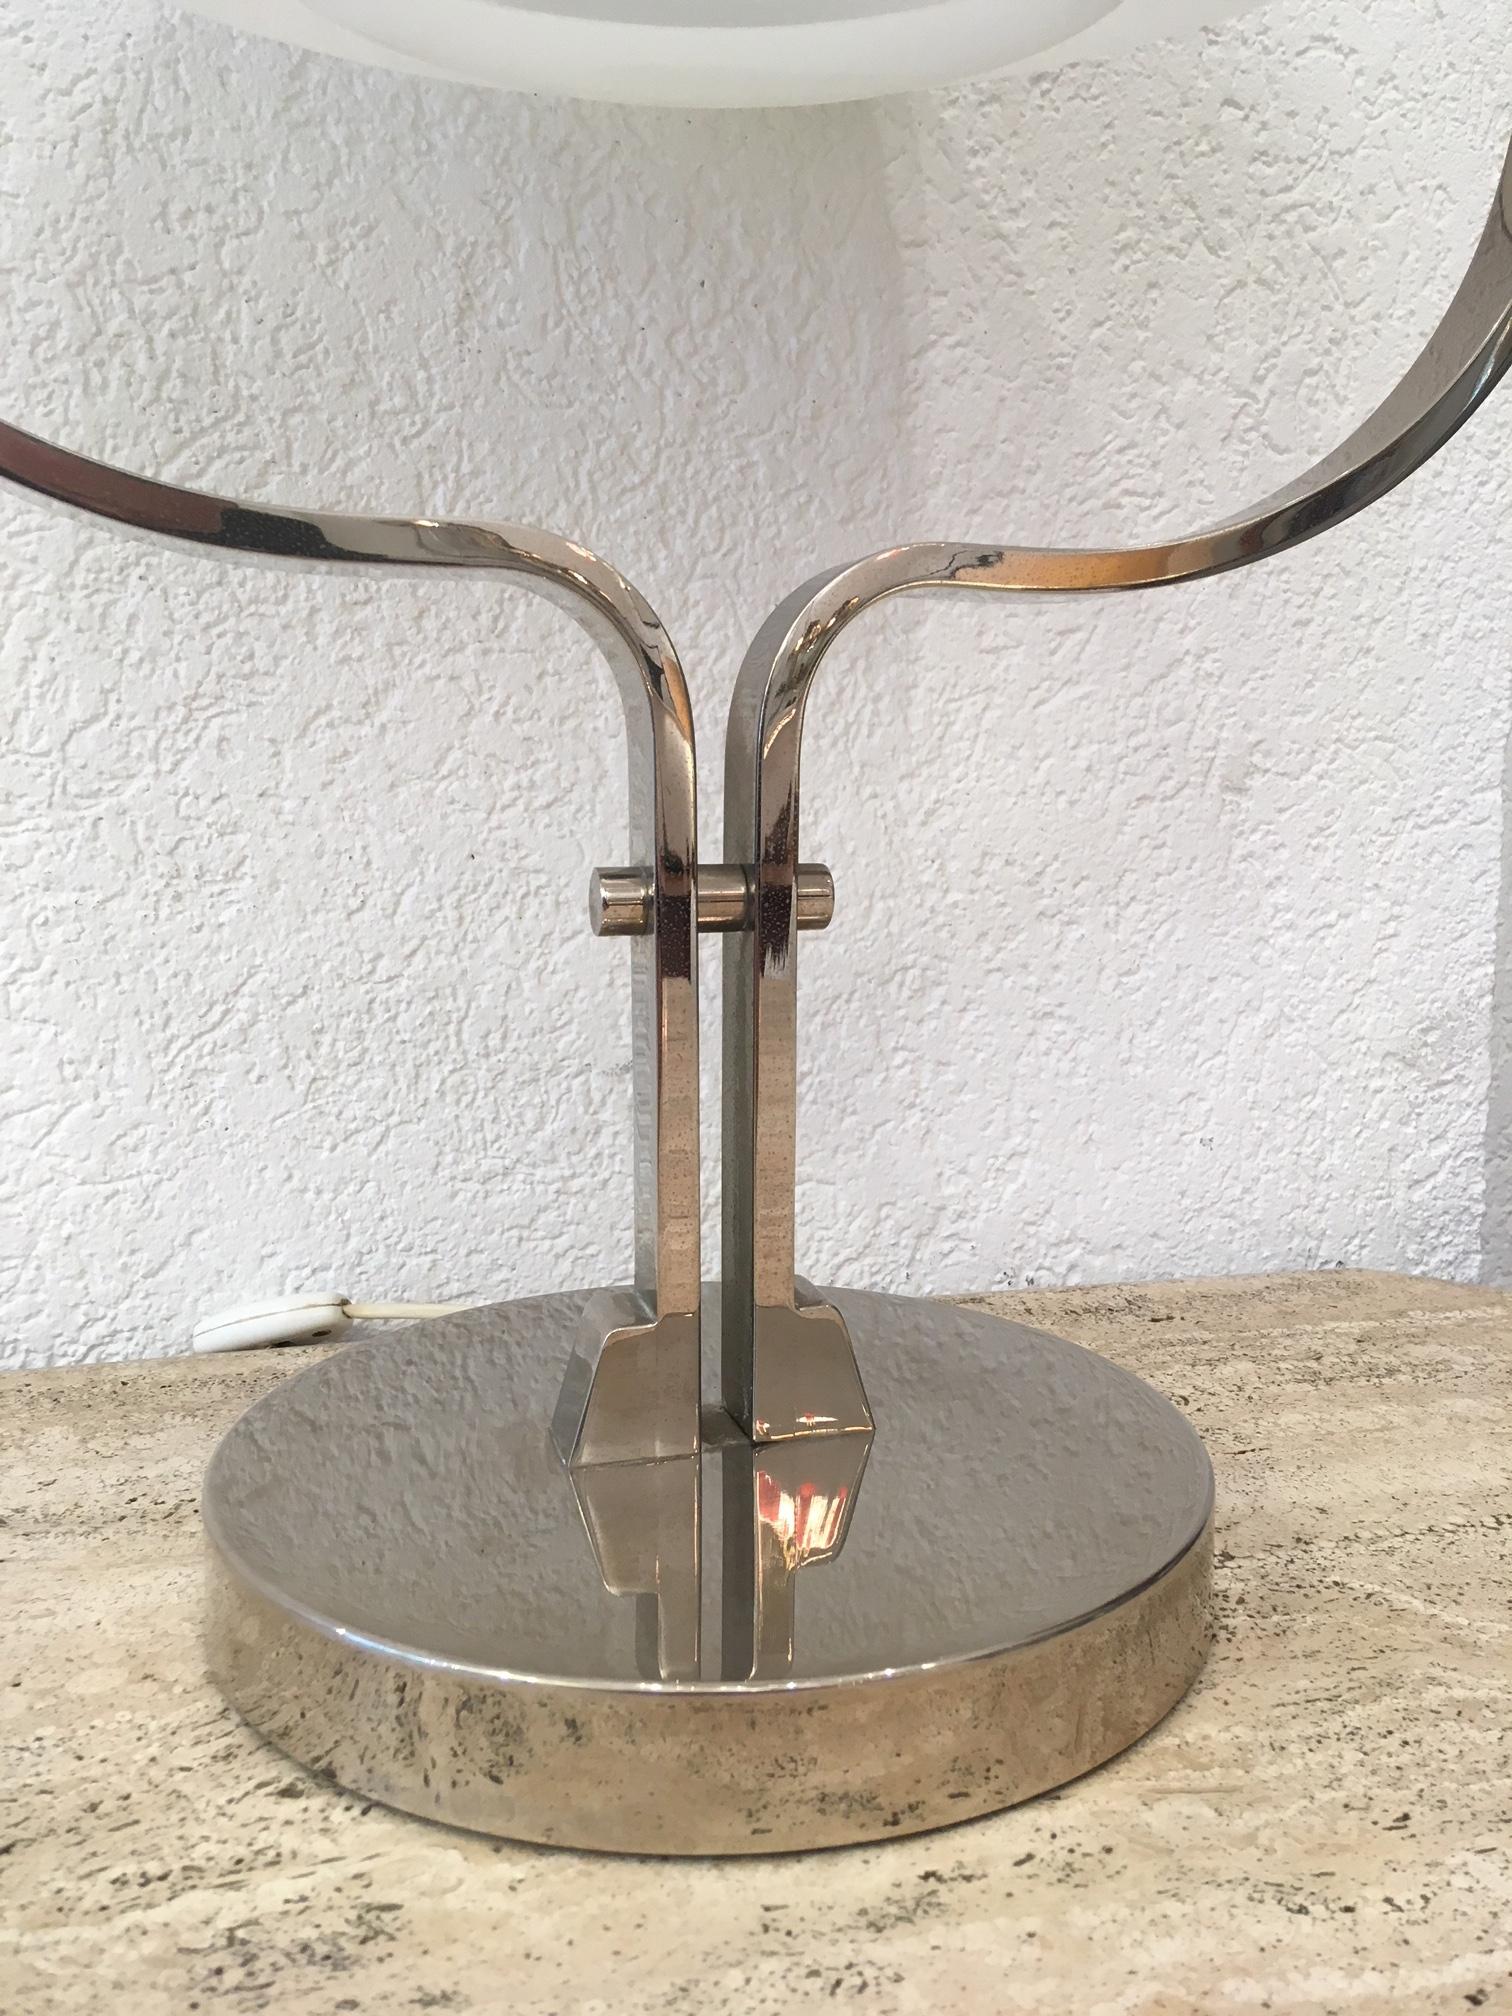 Heavy big chrome and acrylic shade table lamp, circa 1970s.
Around 5-6 kgs
Probably made in Switzerland.
 